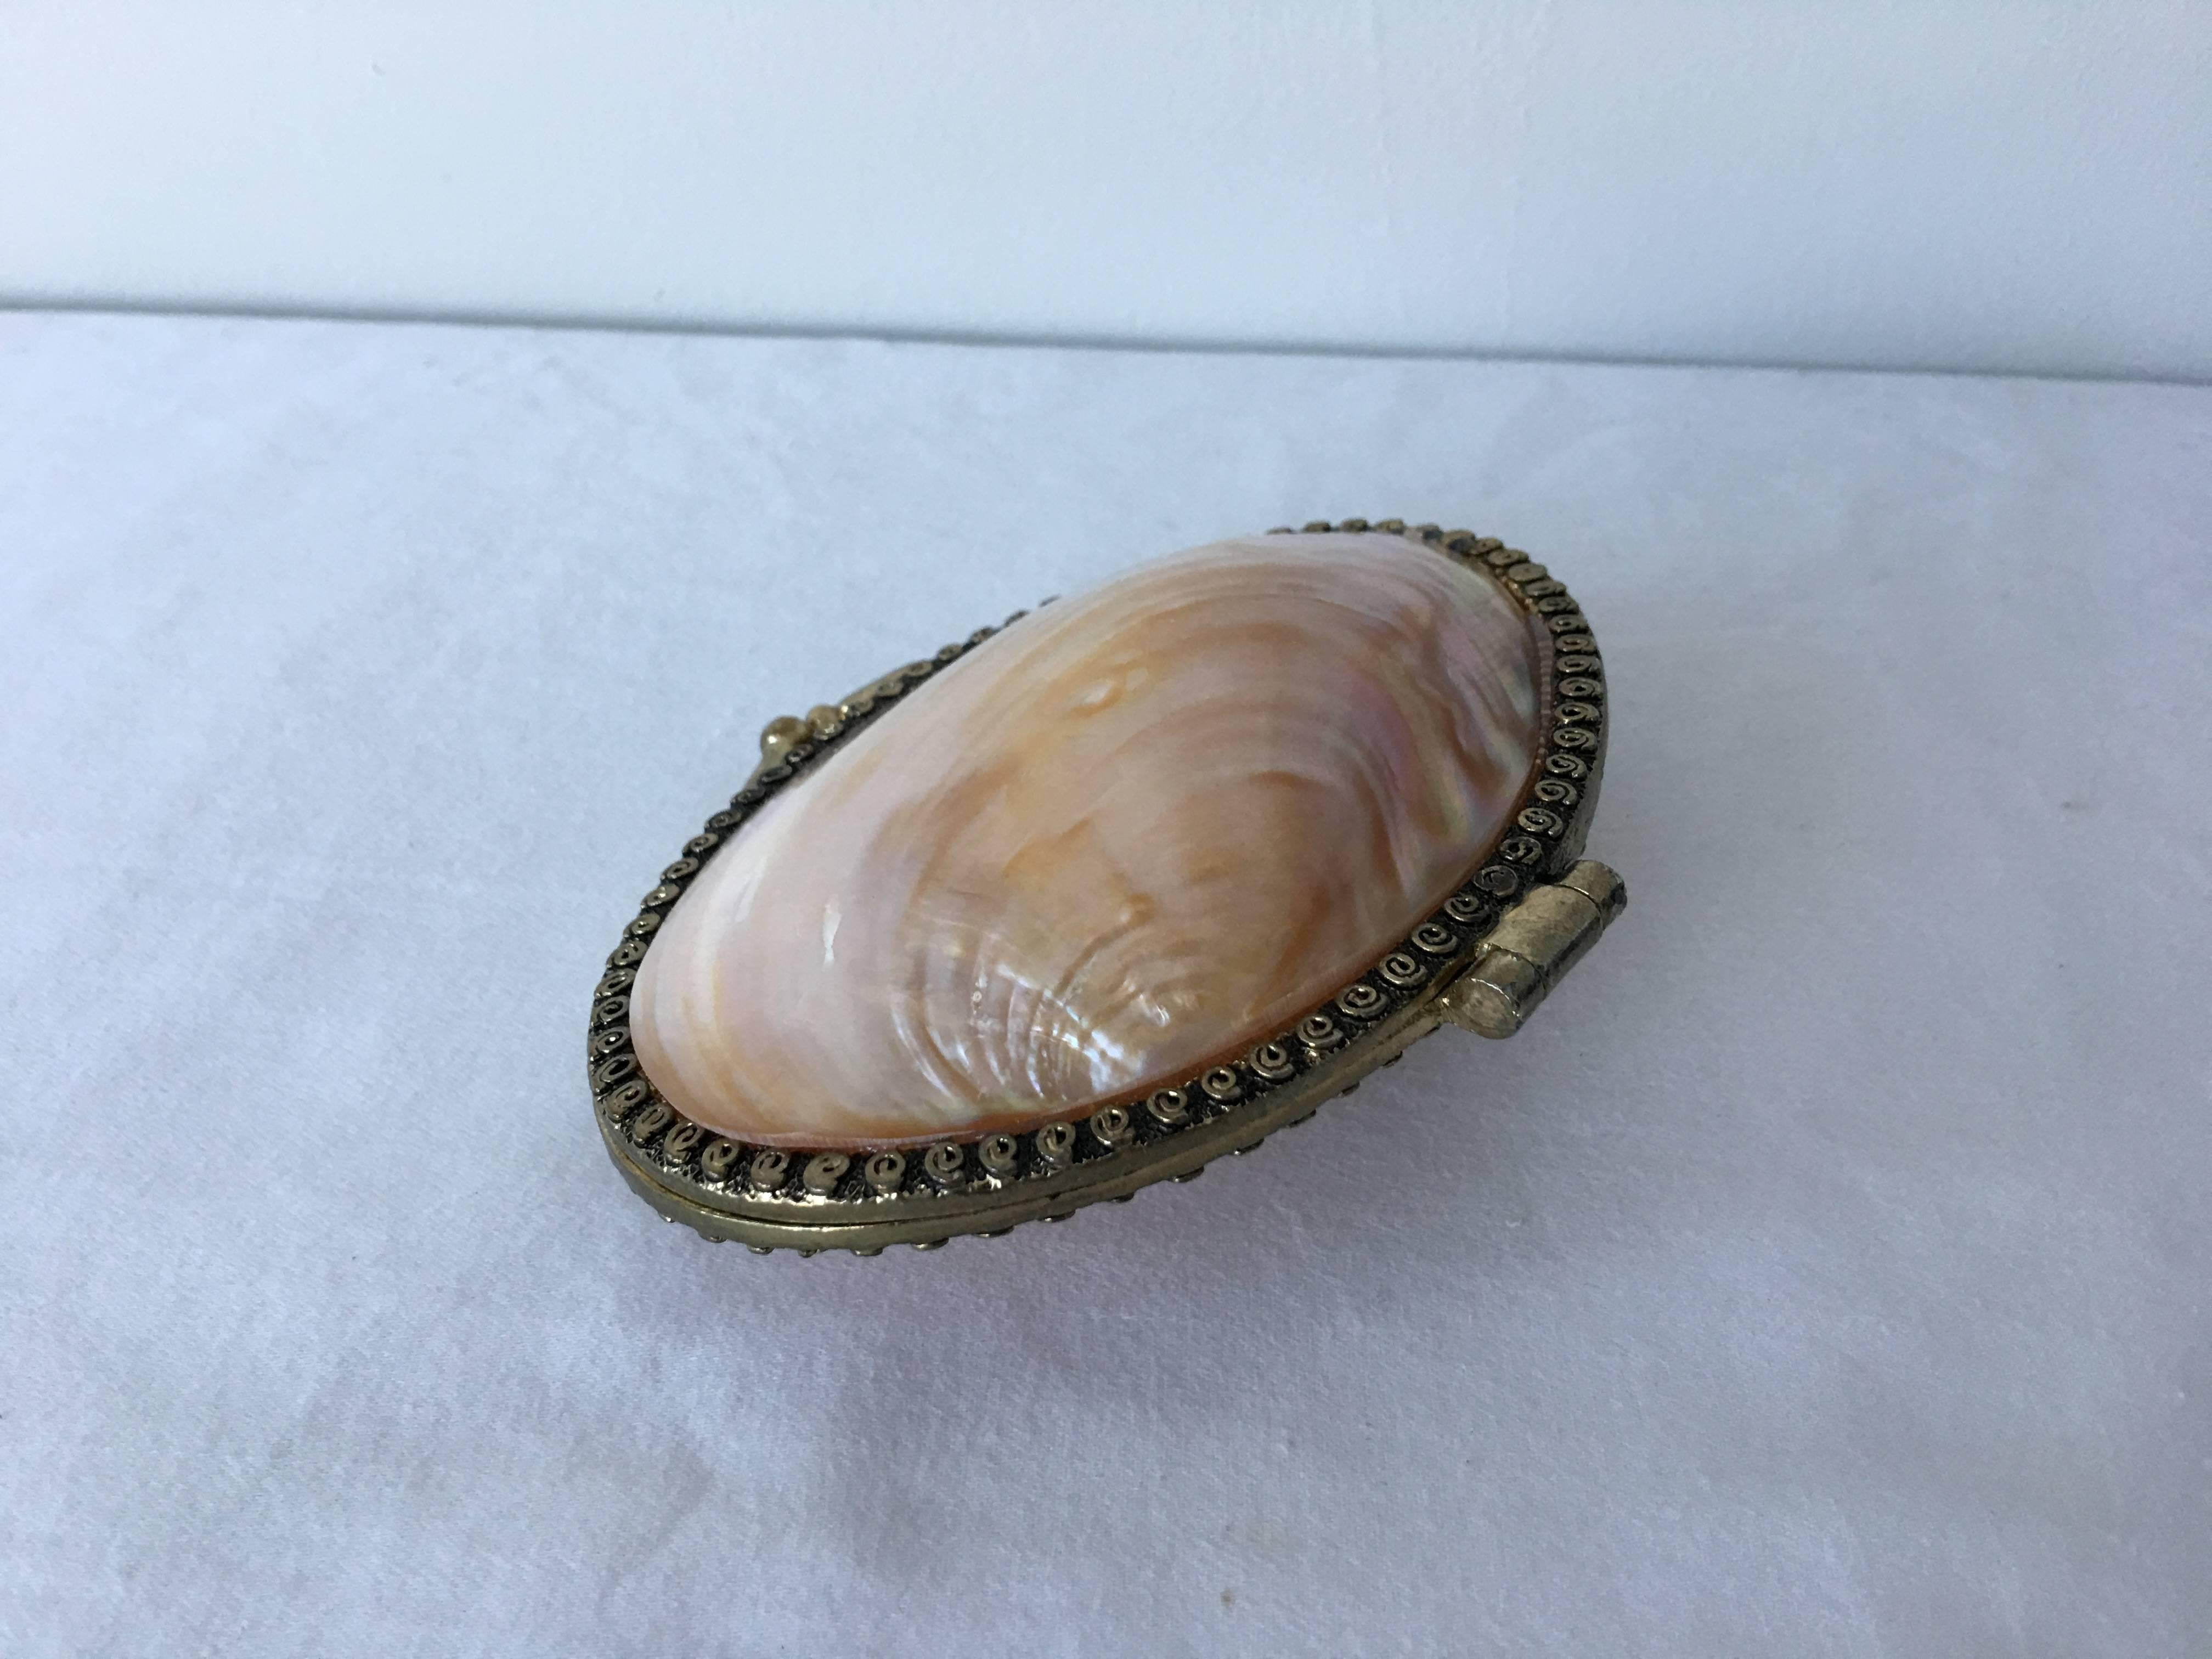 An exceptional, 20th century mother-of-pearl shell trinket box or coin purse. Clasp is in excellent condition, still holds a tight grip.